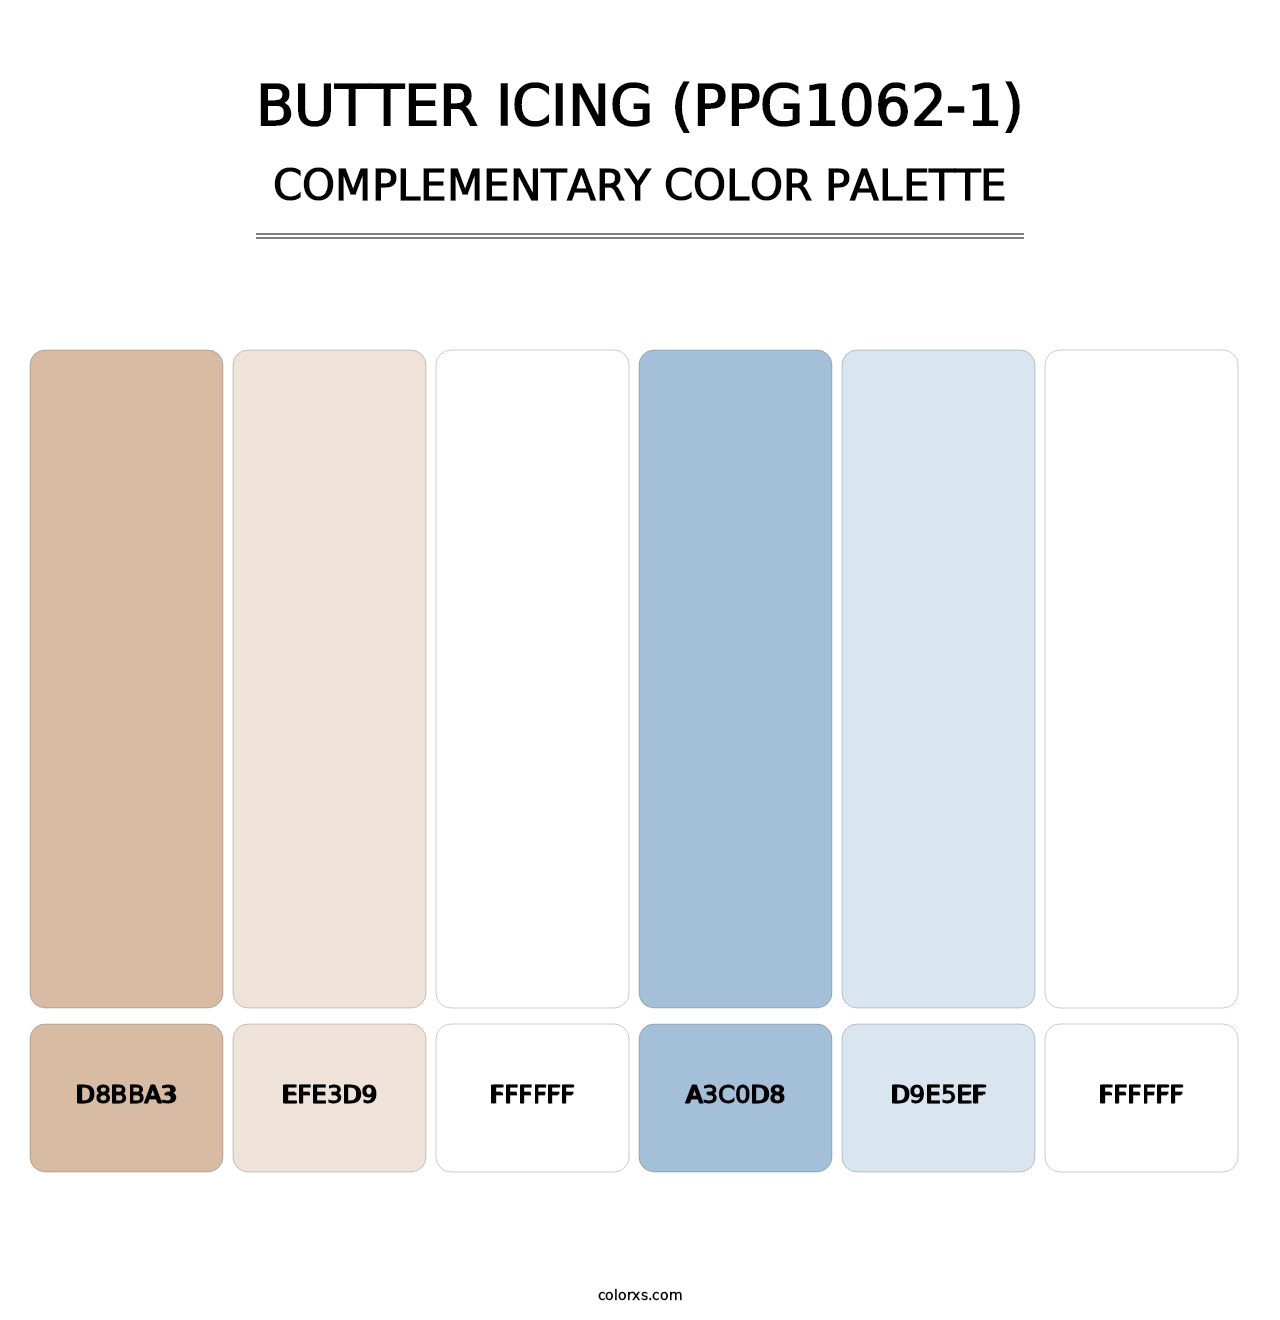 Butter Icing (PPG1062-1) - Complementary Color Palette